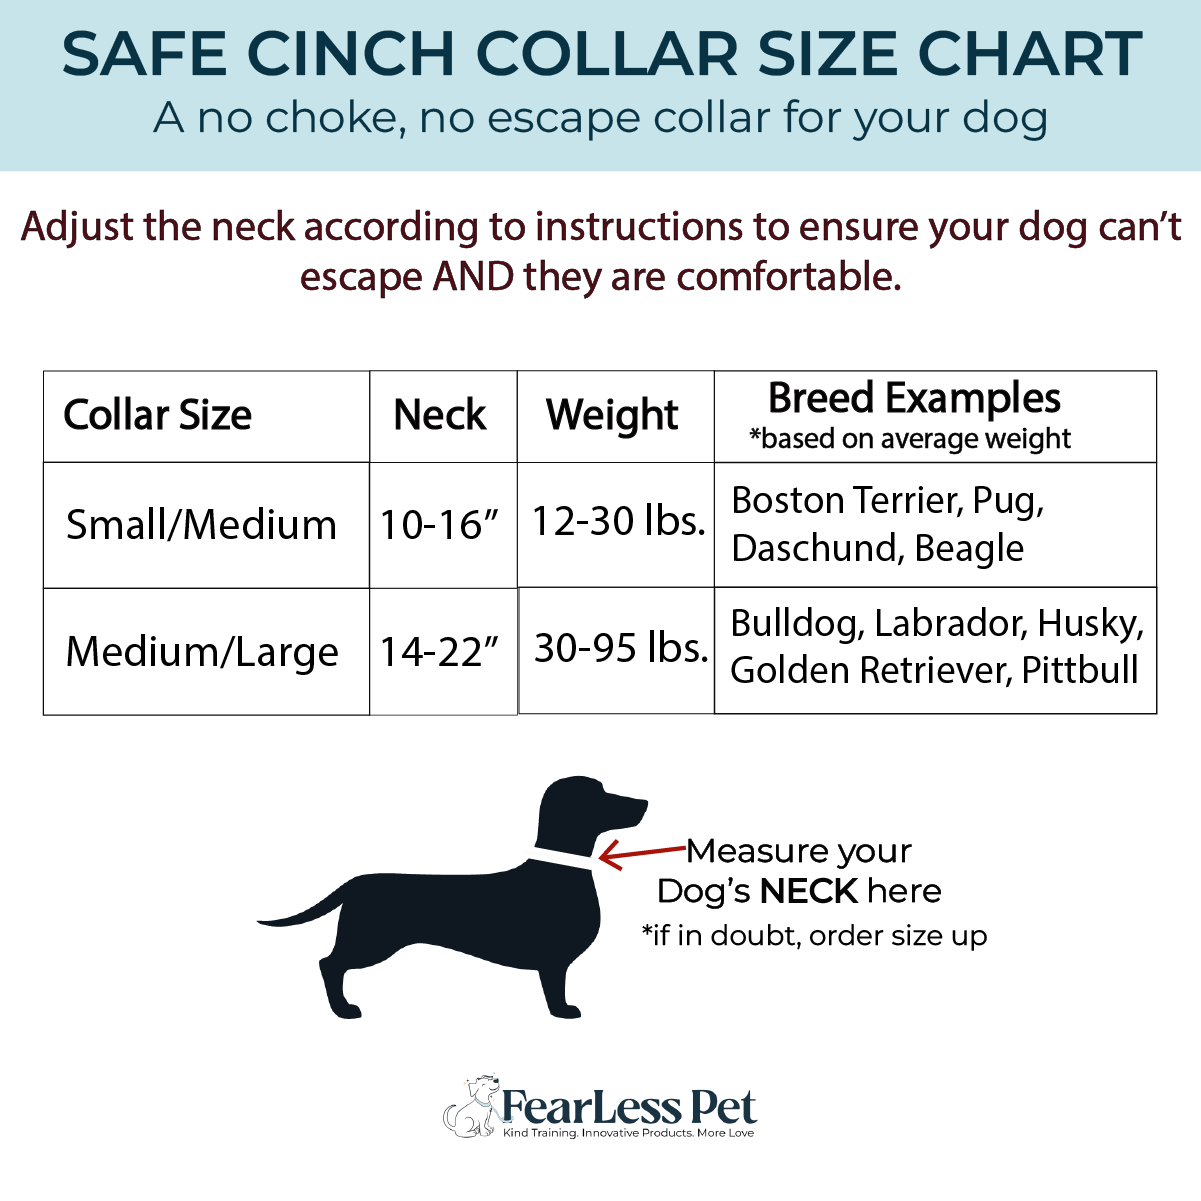 a size chart for an escape proof dog collar for small, medium and large dogs